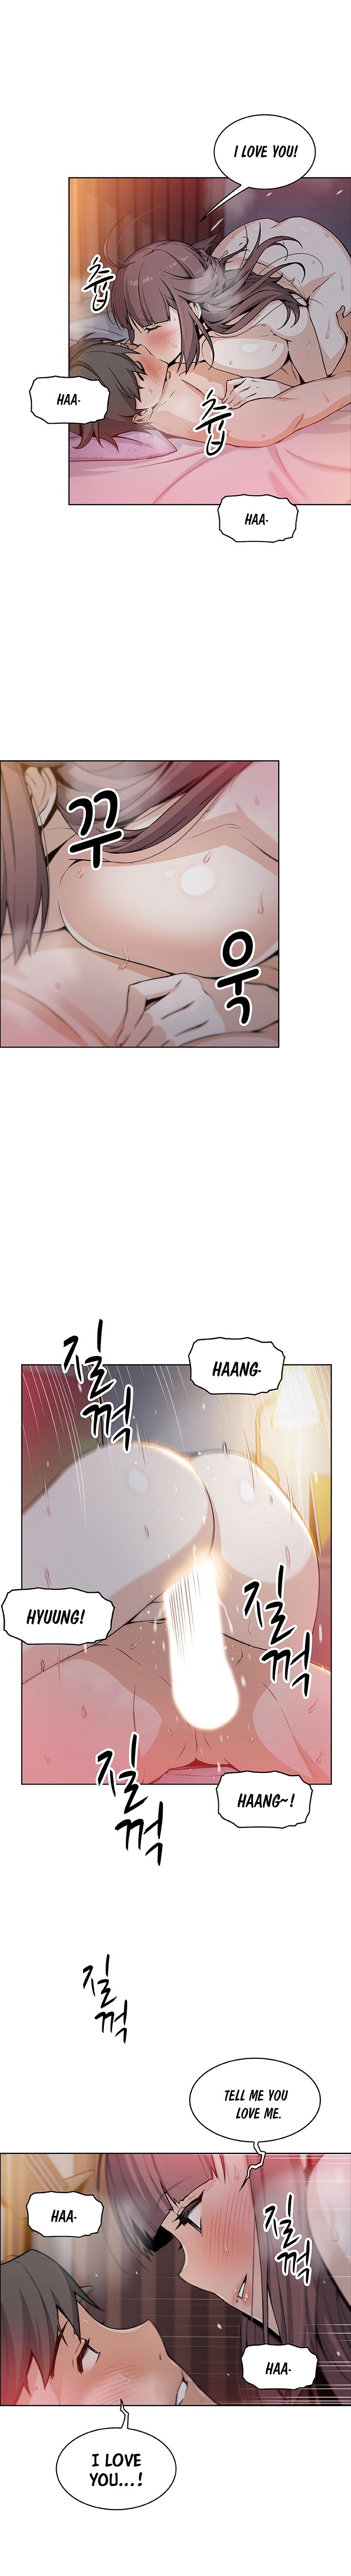 Housekeeper Manhwa - Chapter 34 Page 9